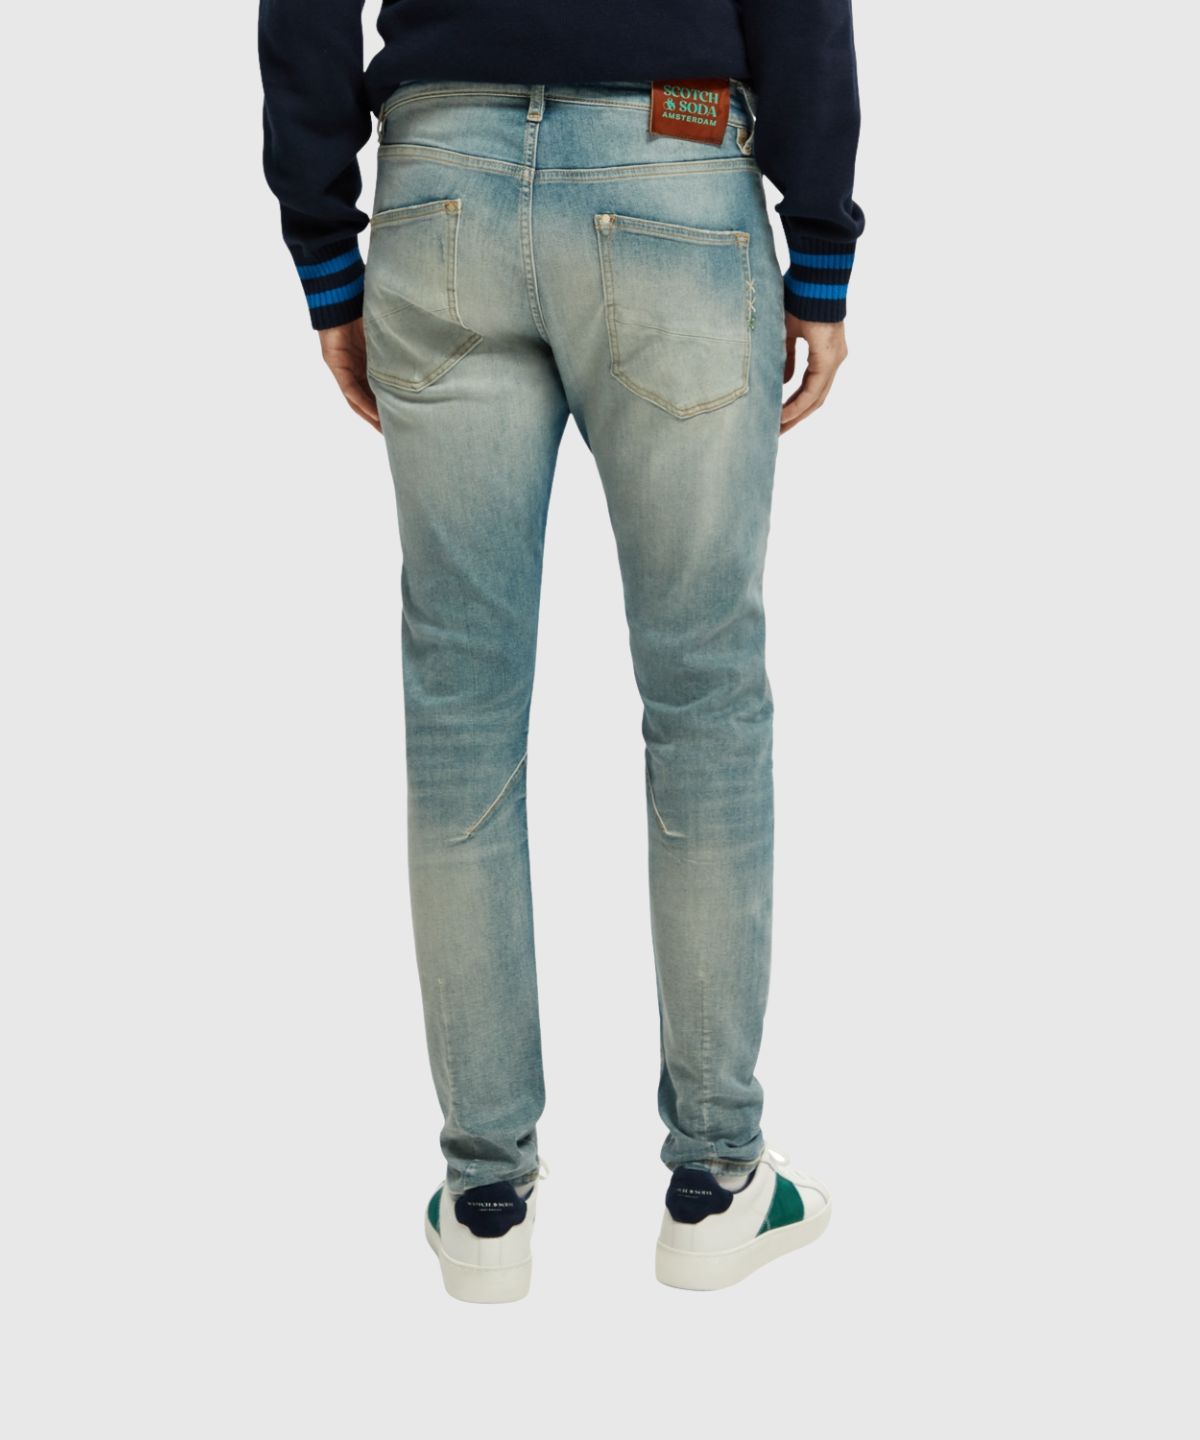 The Singel slim tapered jeans — Cut The Grass